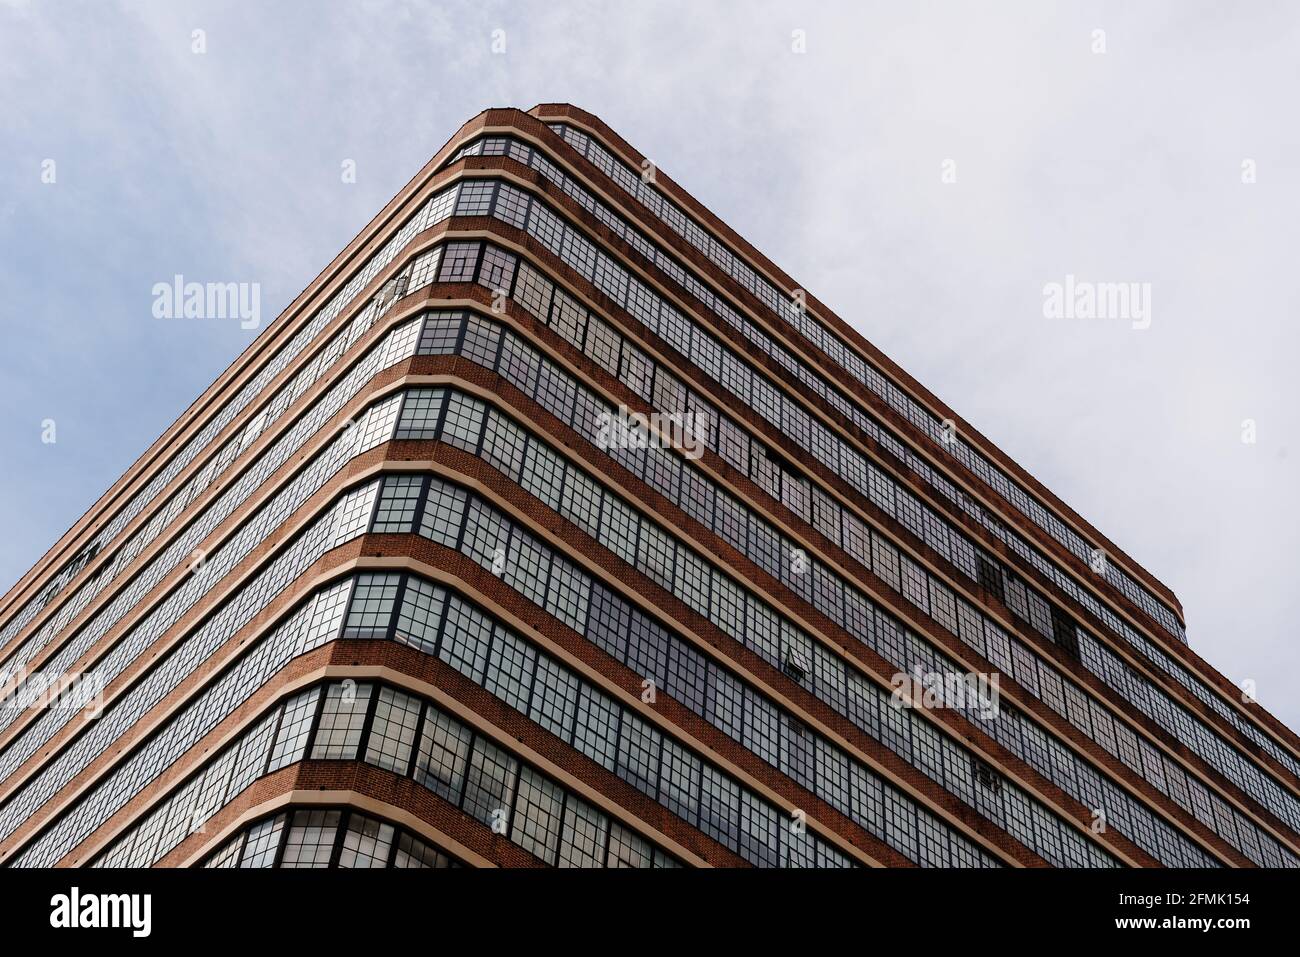 New York City, USA - June 25, 2018: Low angle view of commercial building with warehouses in Tribeca. Stock Photo